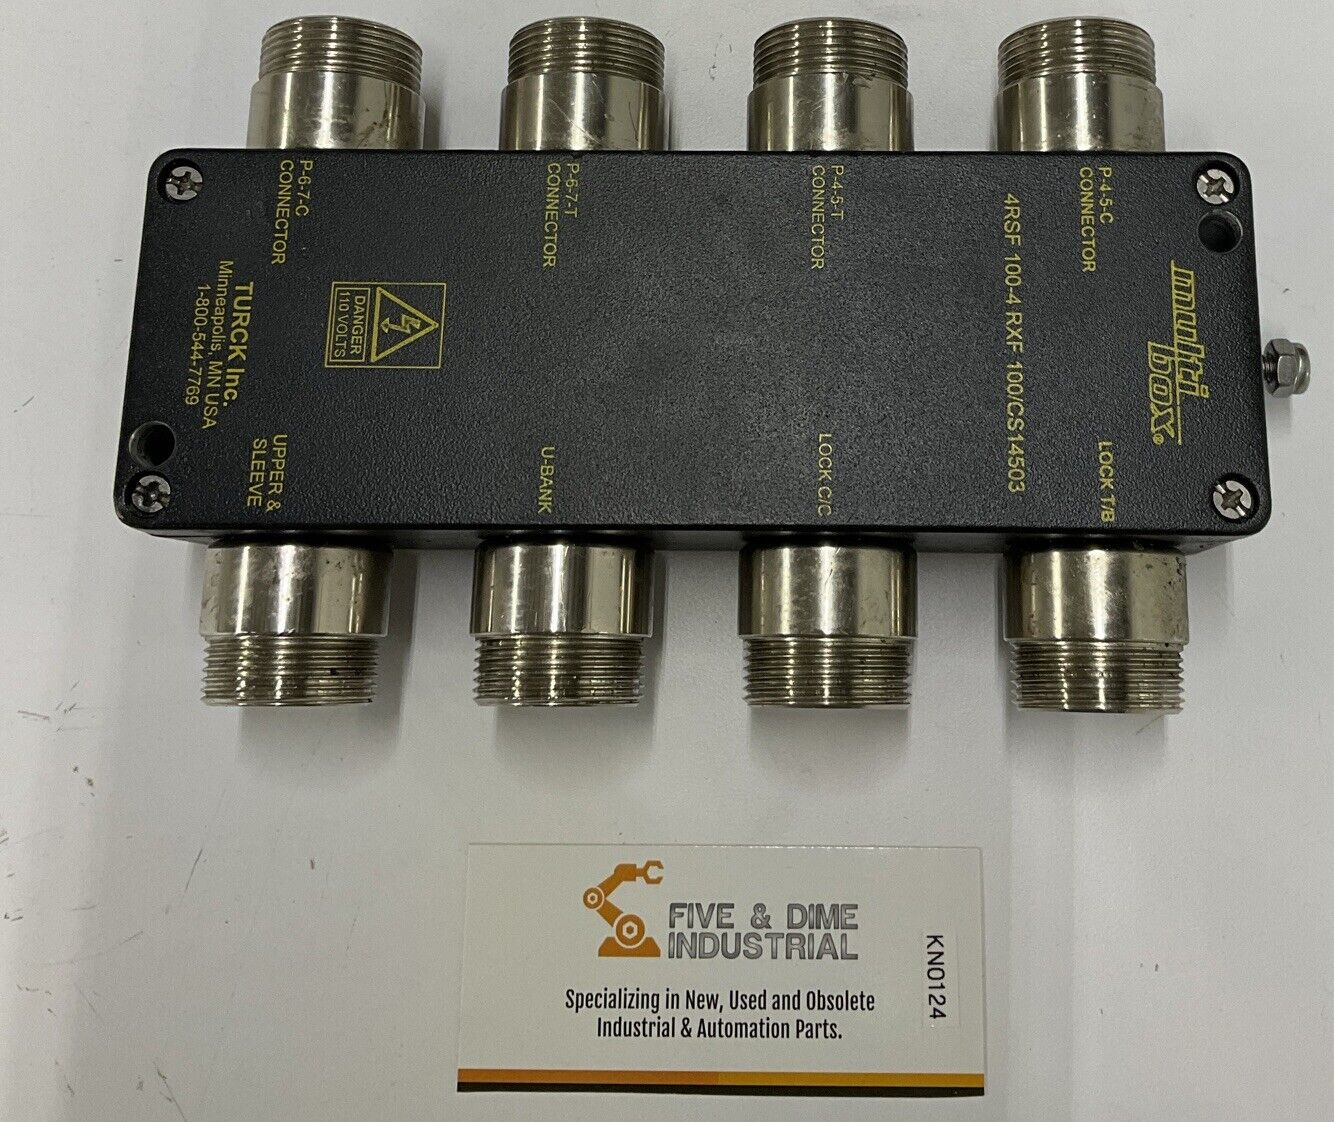 Turck 4RSF 100-4 RXF 100/CS14503 Multibox Connector (RE206)